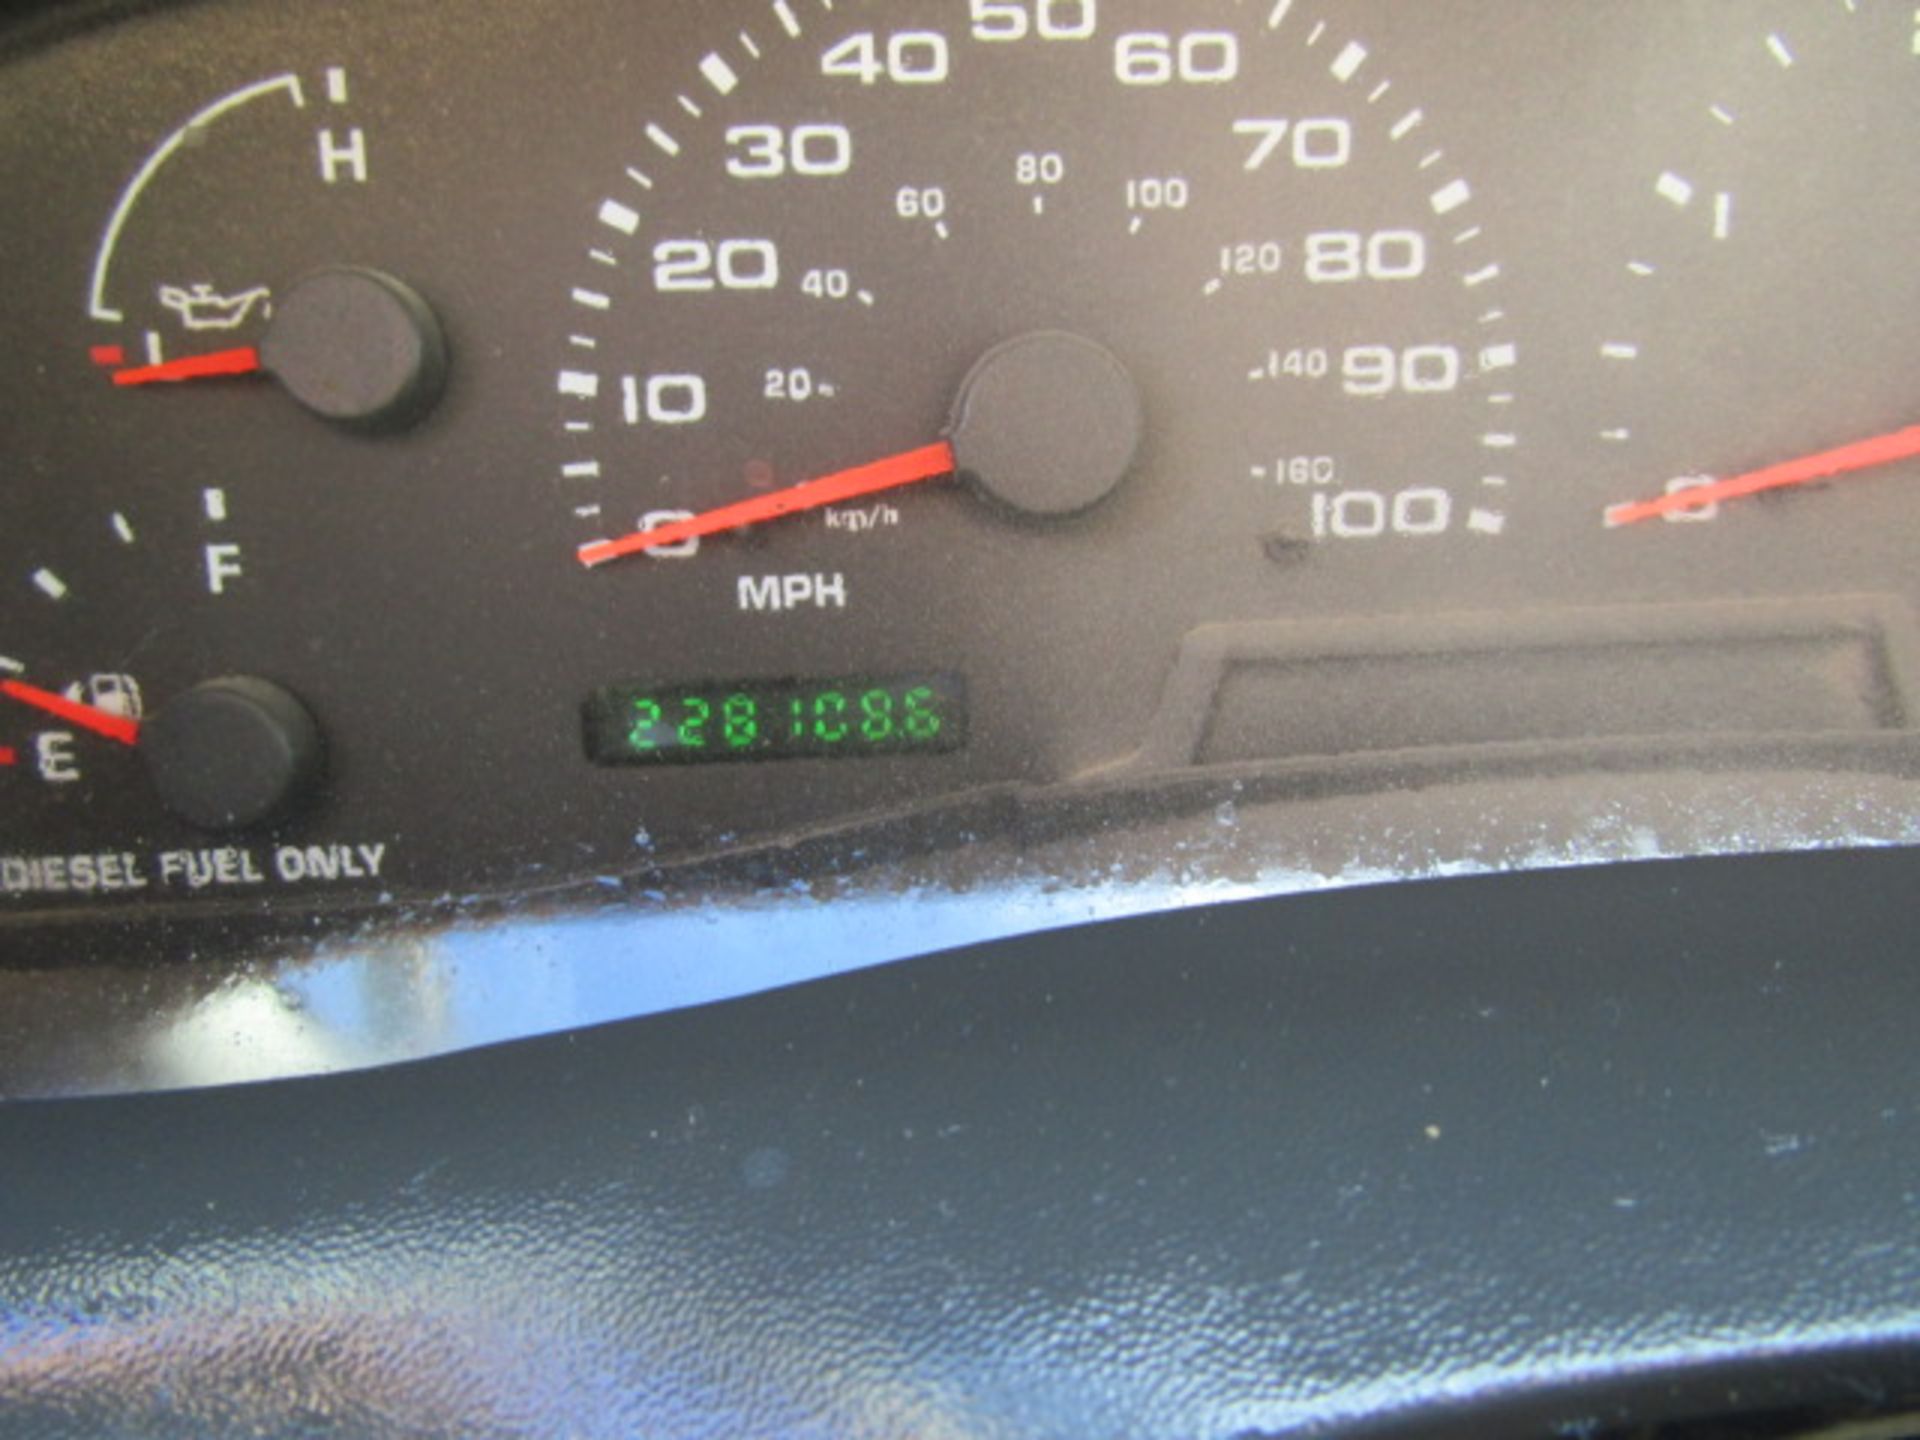 2004 Ford F350 Super Duty Utility Truck, Vin# 1FDWF36P34EA10279, 228,108 miles, Automatic, Power - Image 4 of 23